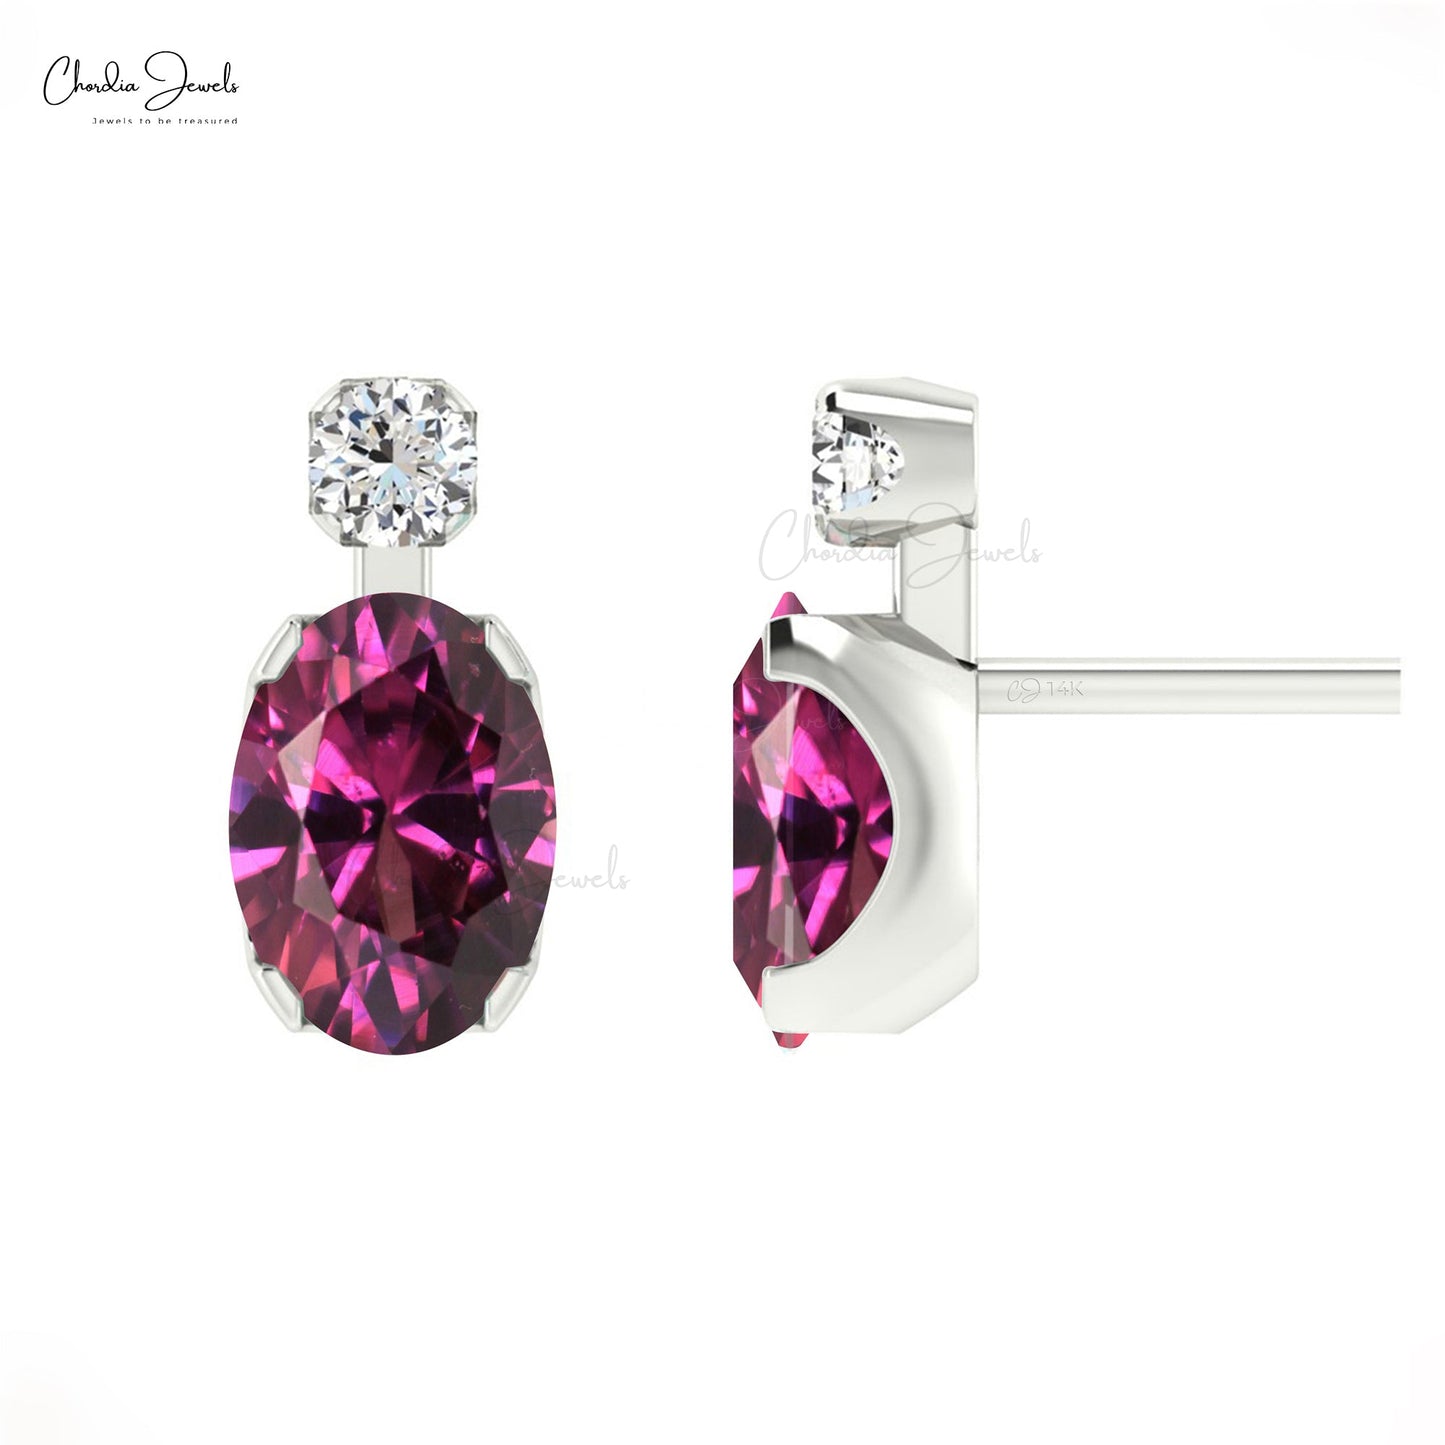 Load image into Gallery viewer, Stunning 14K Solid Gold Oval Cut Rhodolite Garnet Diamond Accented Studs Earrings
